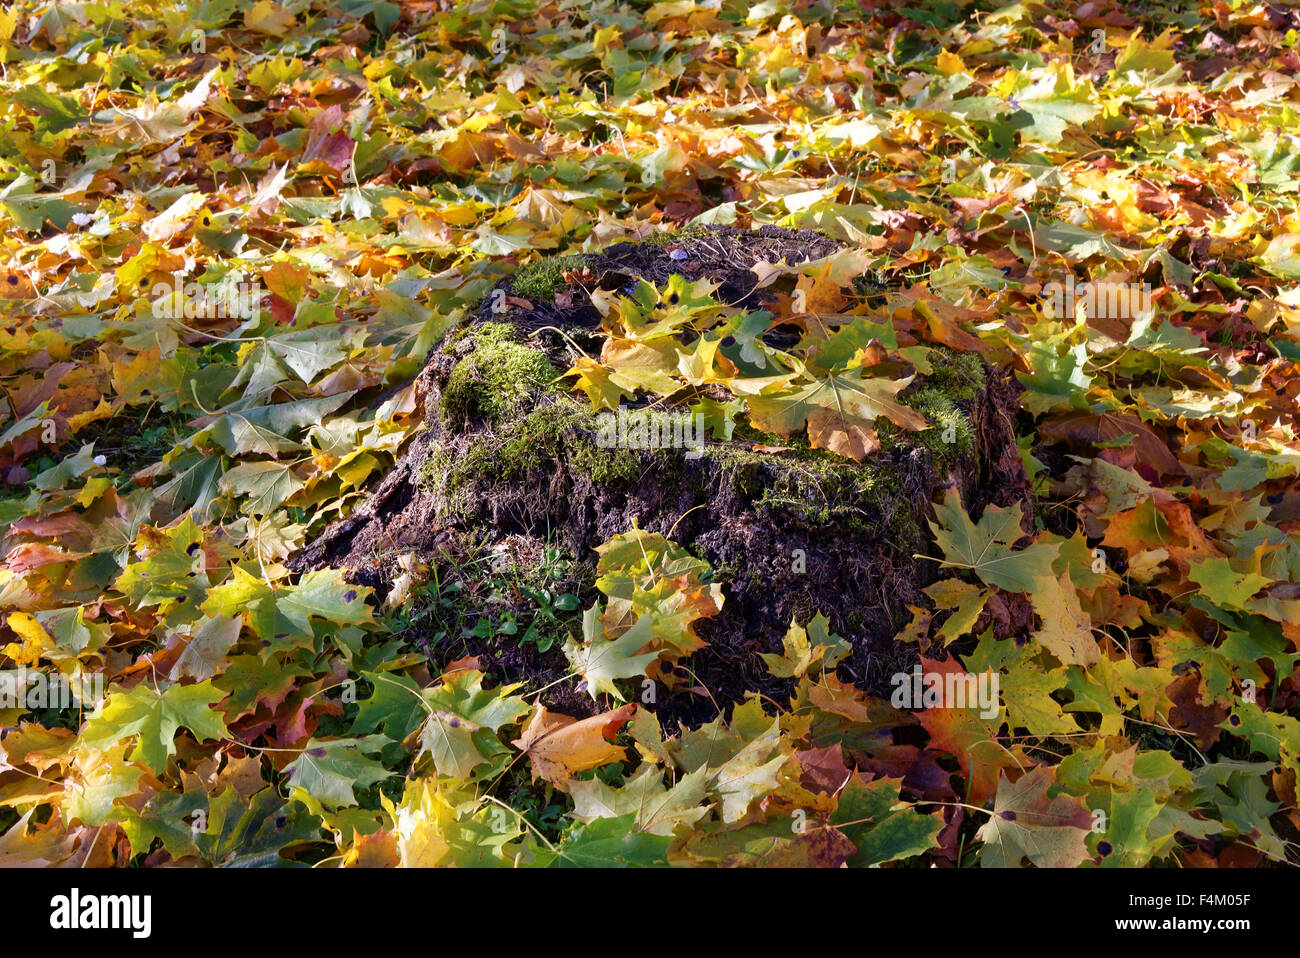 Colorful maple leaves fallen onto an old stump in October. Stock Photo